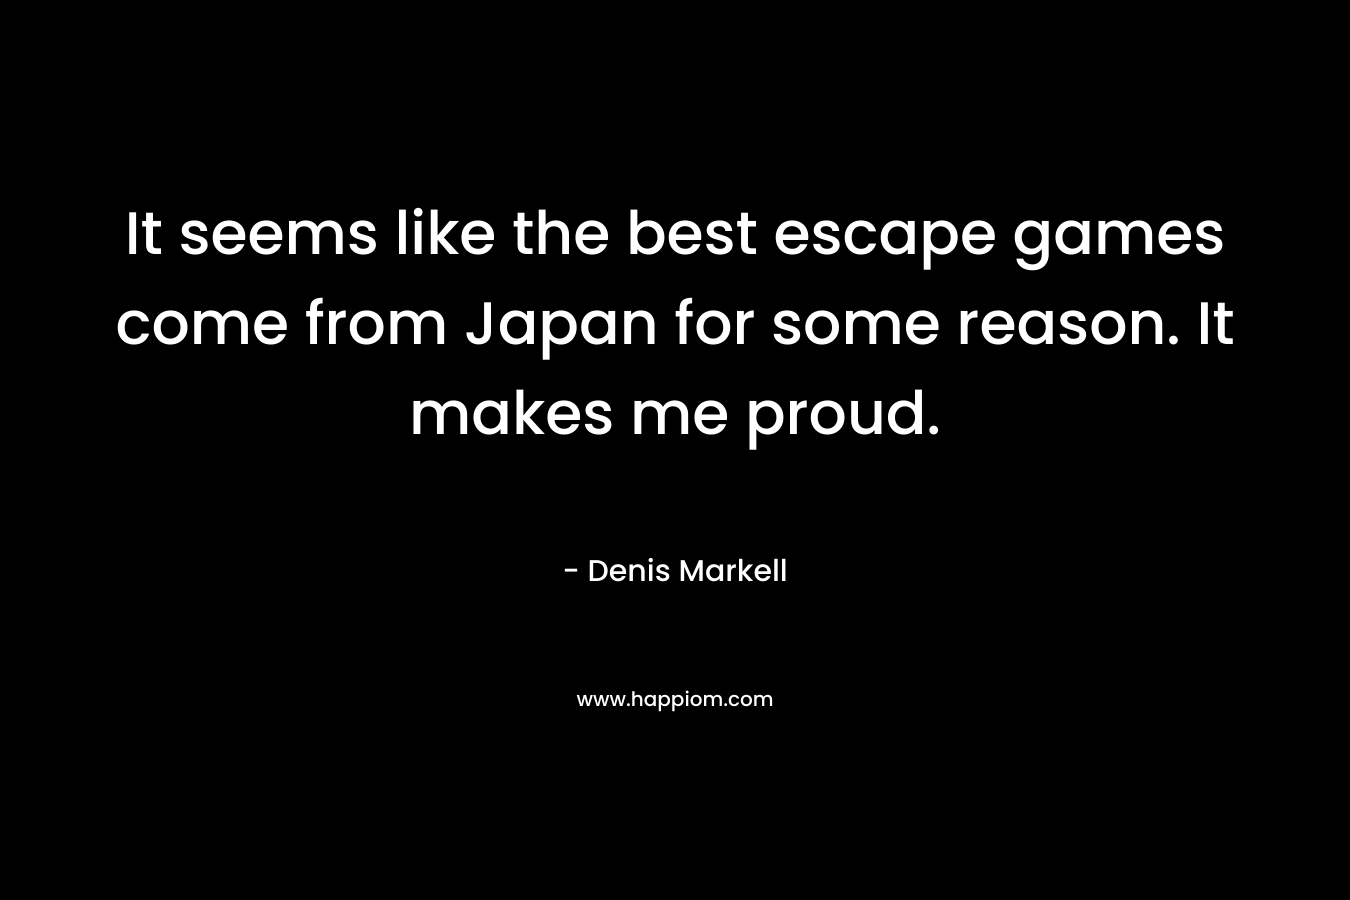 It seems like the best escape games come from Japan for some reason. It makes me proud. – Denis Markell